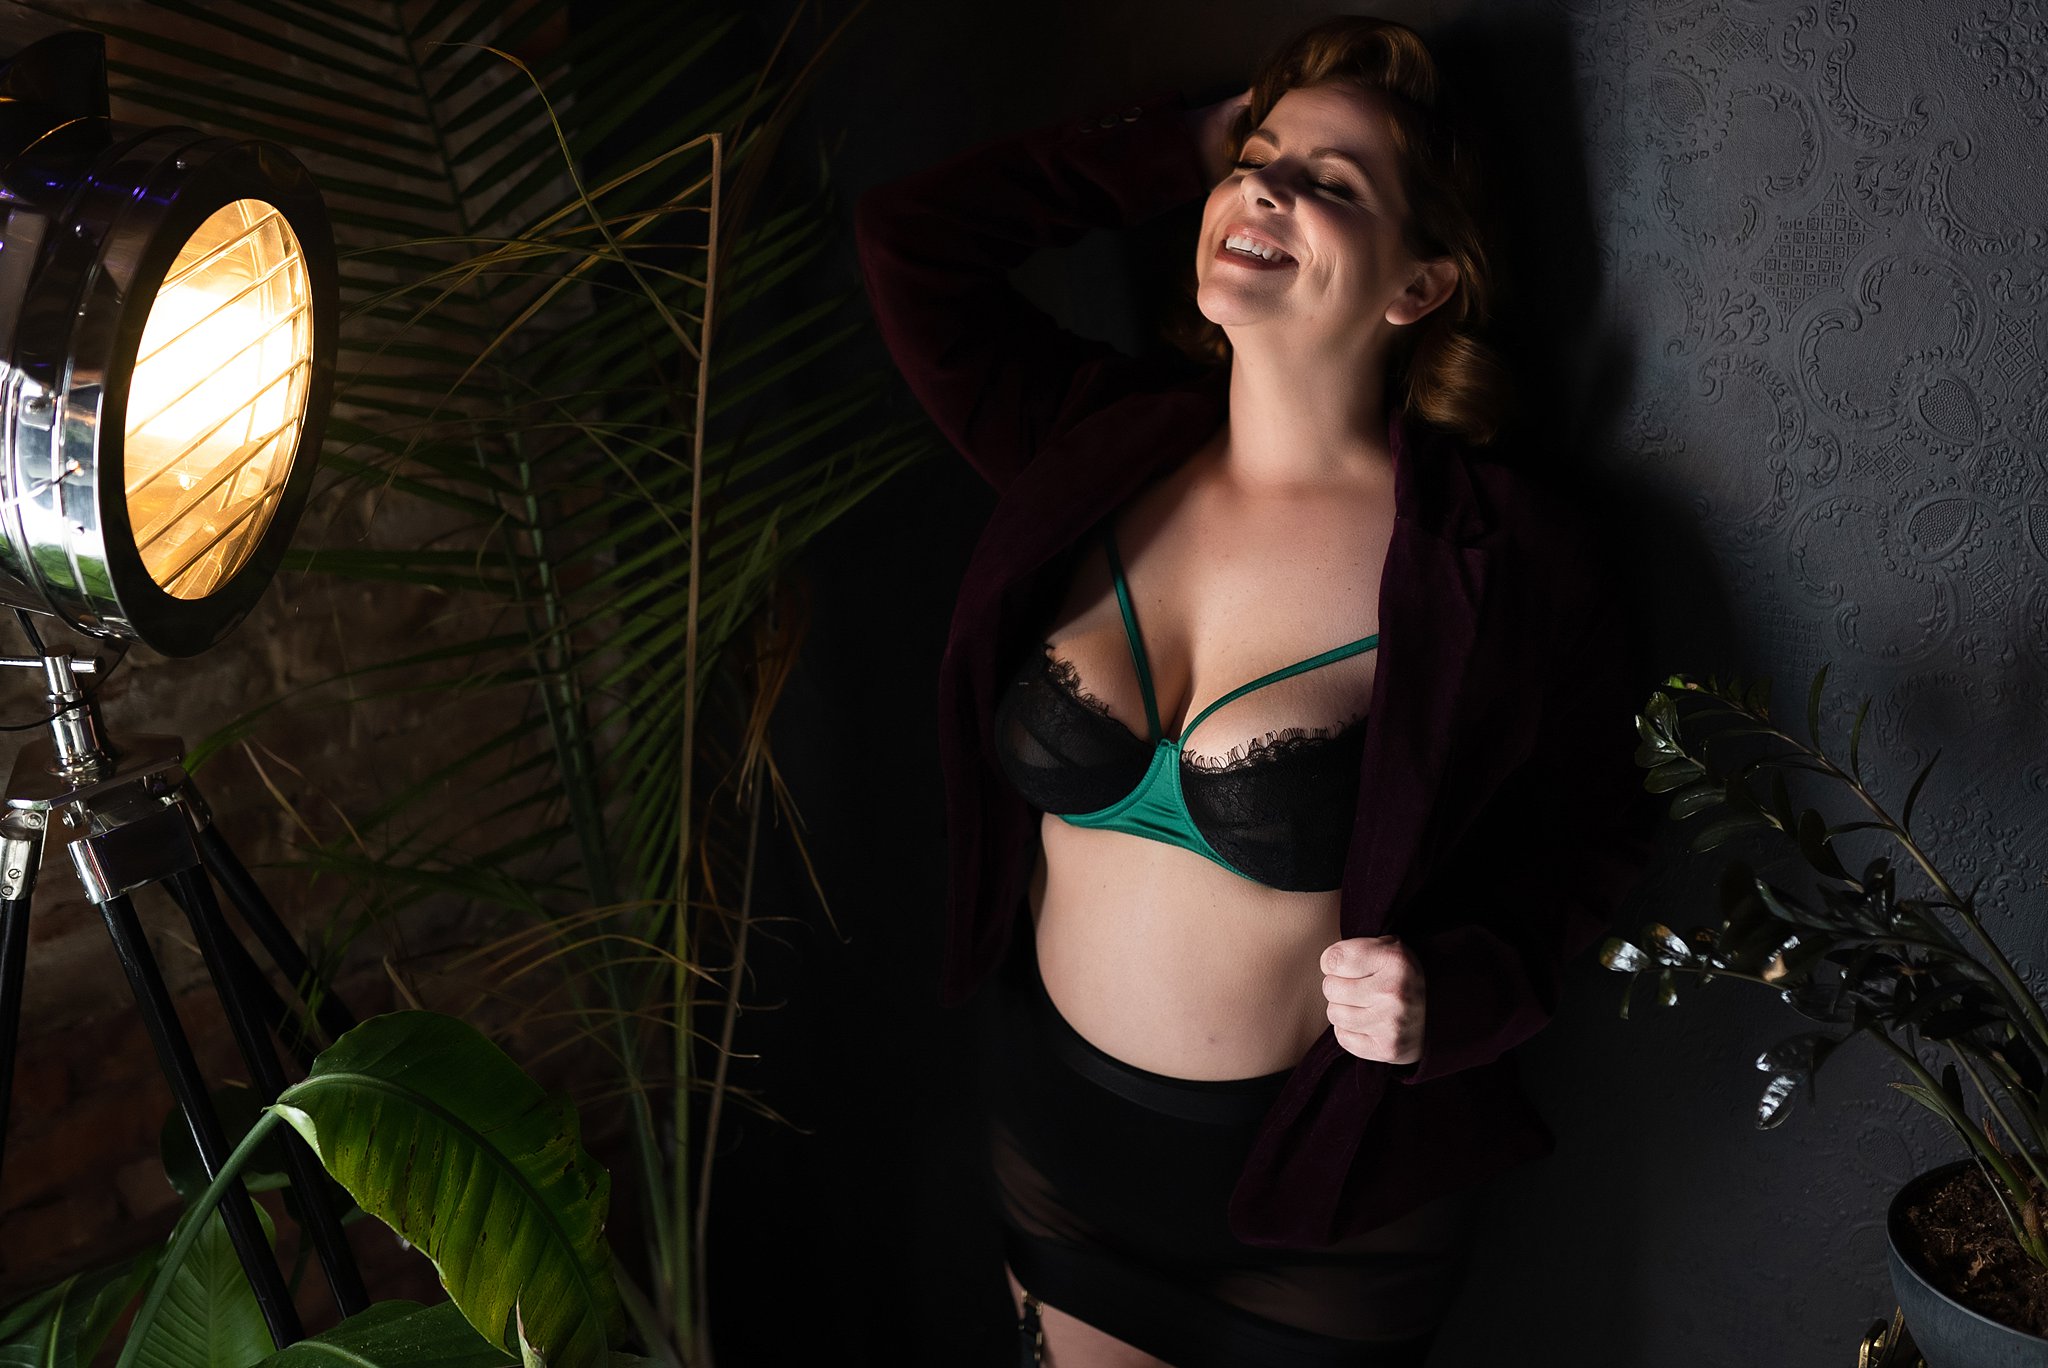 Miss P stands against a black damask textured wall during a 420 photoshoot with LeZandra Photography. She is facing a vintage studio light fixture while her right arm is raised and she runs her fingers through her hair. Miss P wears an emerald green satin bra with black lace and emerald green straps. Over her bra she is wearing a burgundy velvet jacket with black high waisted panties and a black sheer skirt.